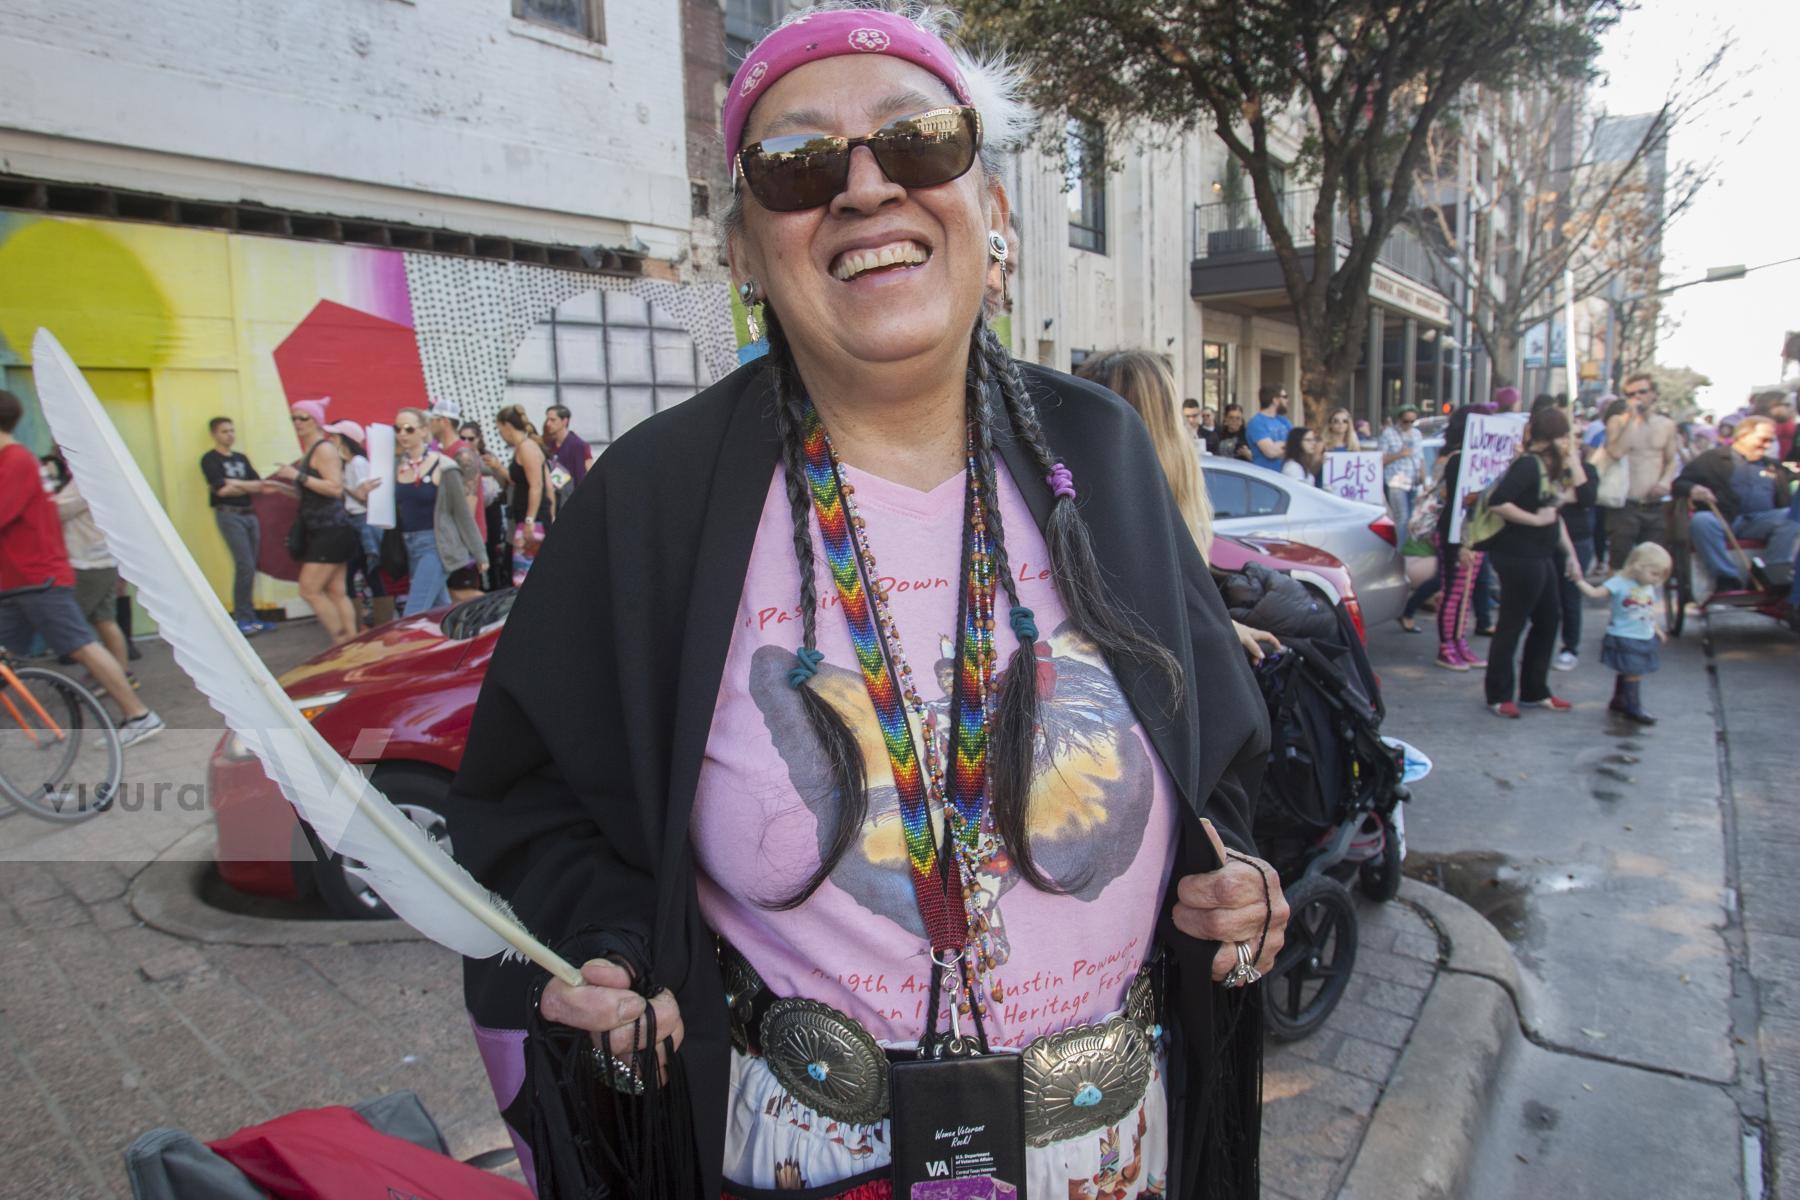 Purchase Women's March Austin Texas January 22, 2017 by Jaime R. Carrero